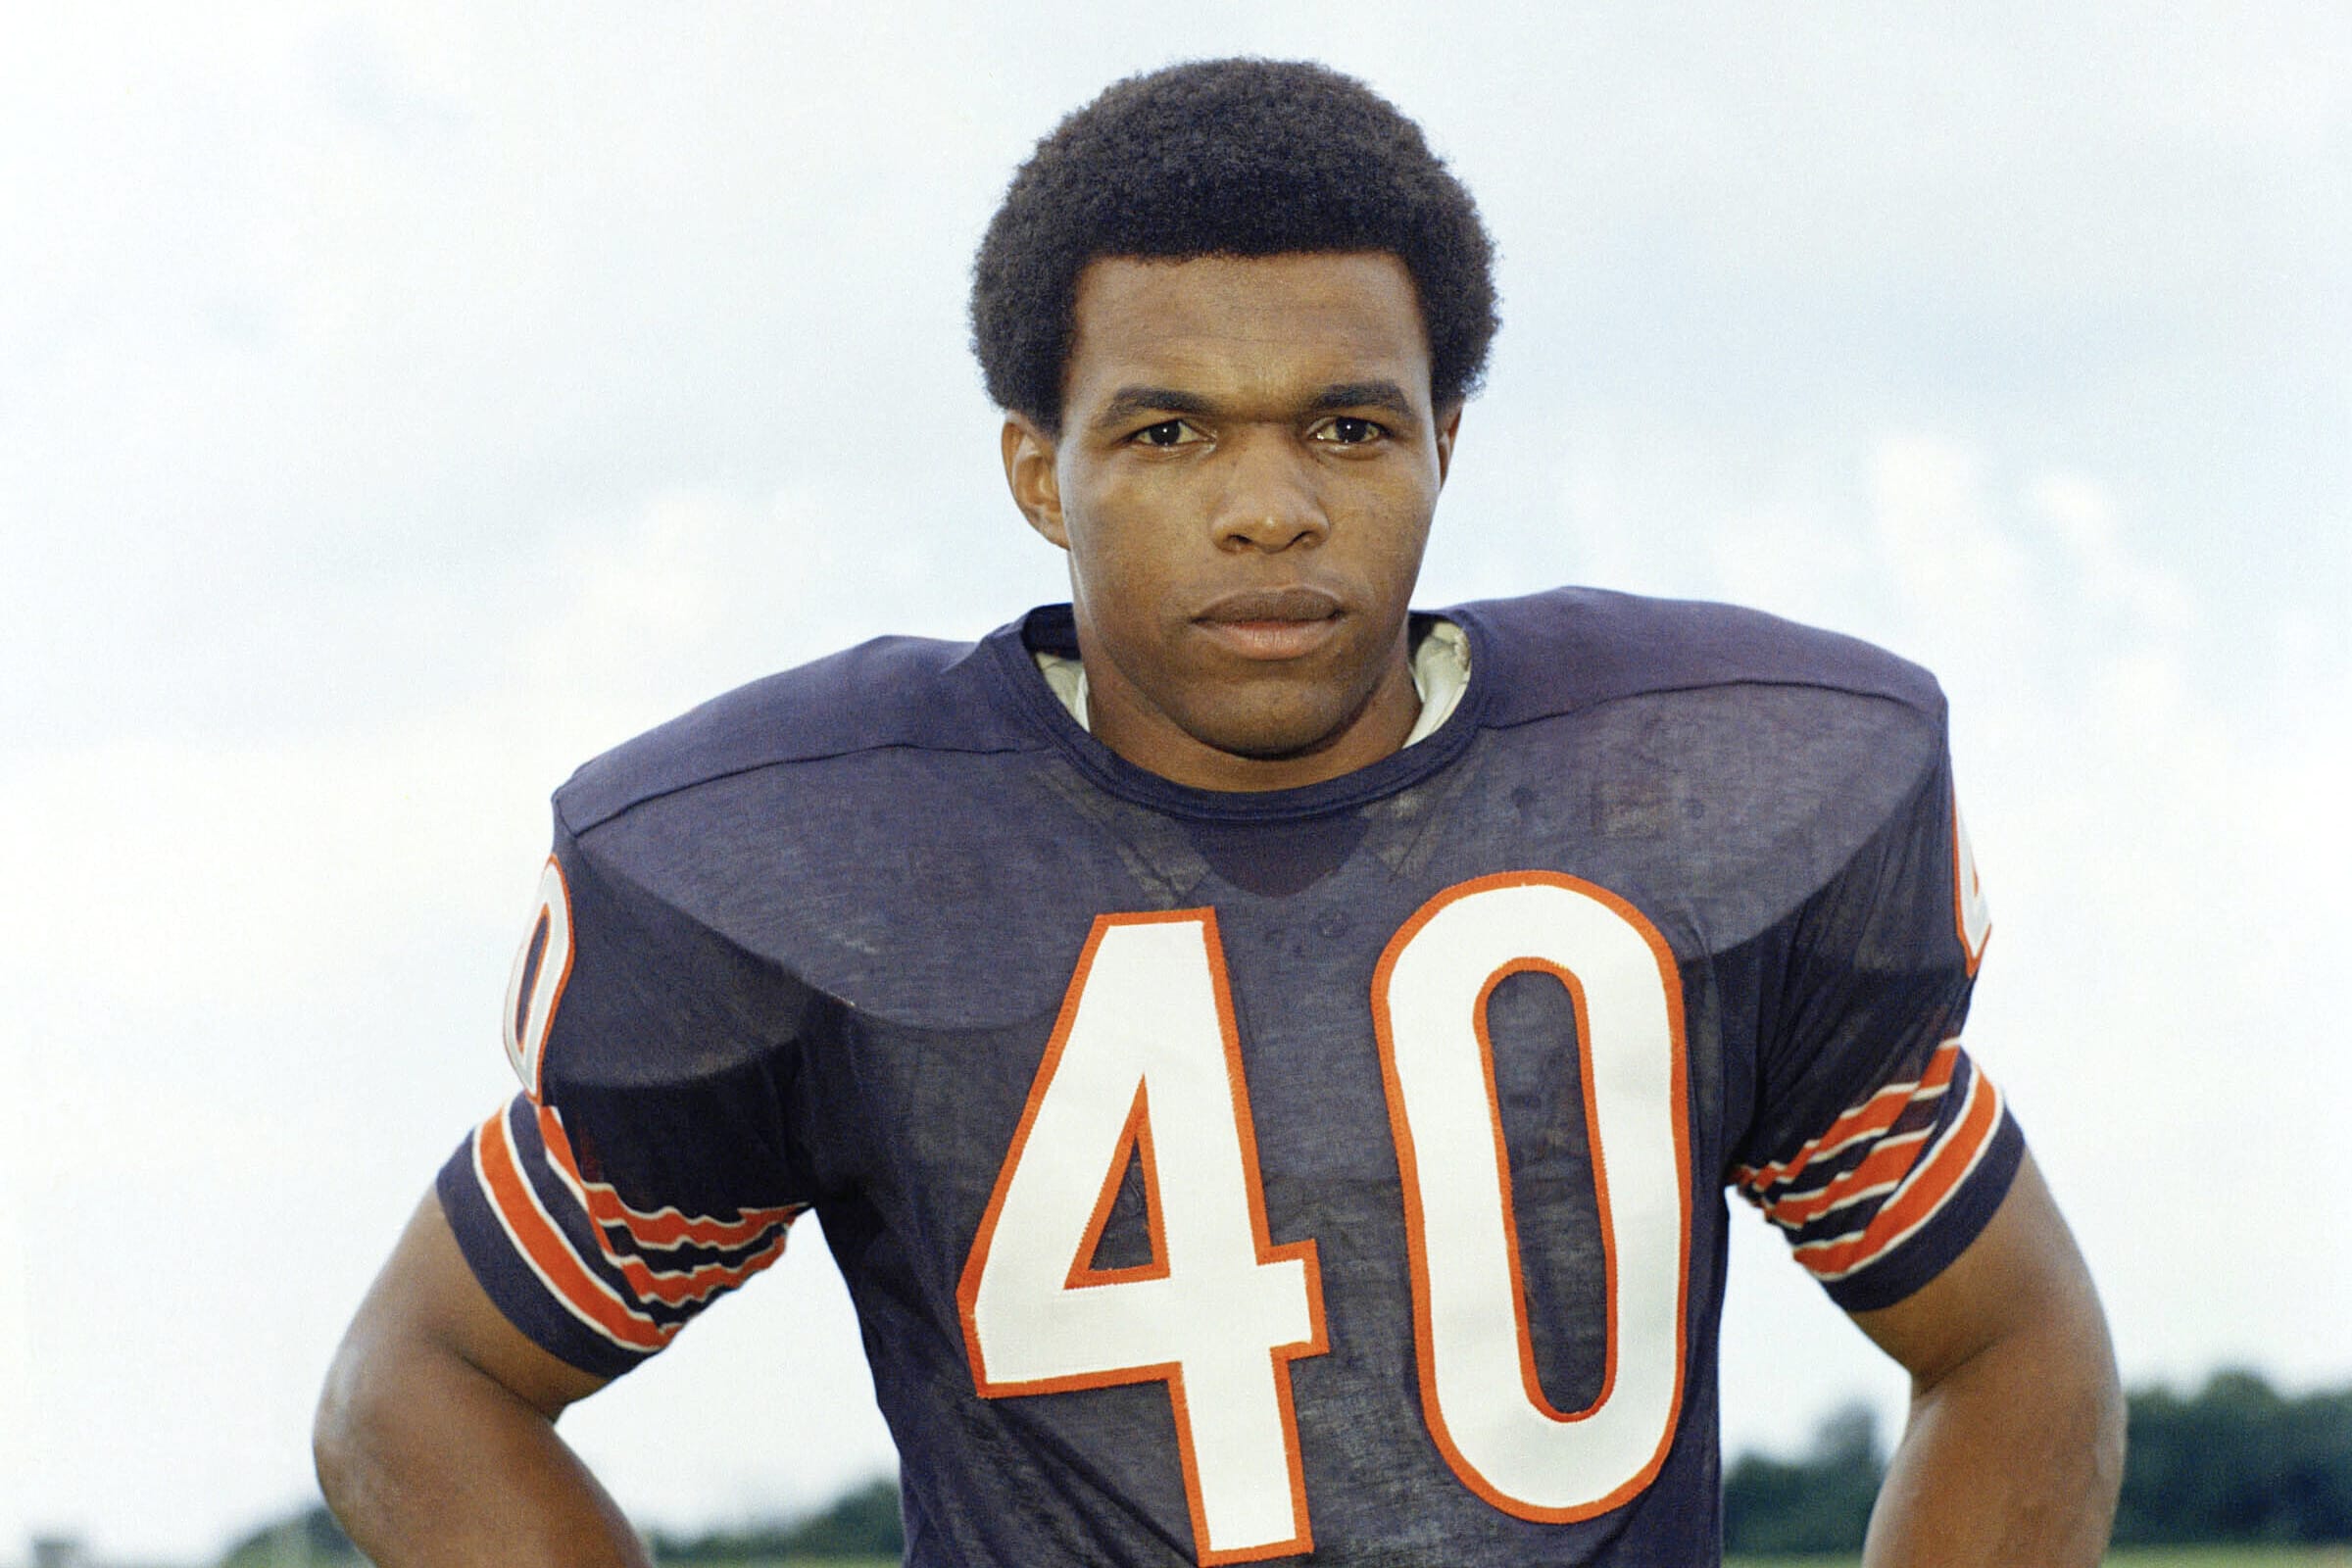 Chicago Bears football player Gale Sayers in 1970. Hall of Famer Gale Sayers, who made his mark as one of the NFL’s best all-purpose running backs and was later celebrated for his enduring friendship with a Chicago Bears teammate with cancer, has died. He was 77. Nicknamed “The Kansas Comet” and considered among the best open-field runners the game has ever seen, Sayers died Wednesday, Sept. 23, 2020, according to the Pro Football Hall of Fame.